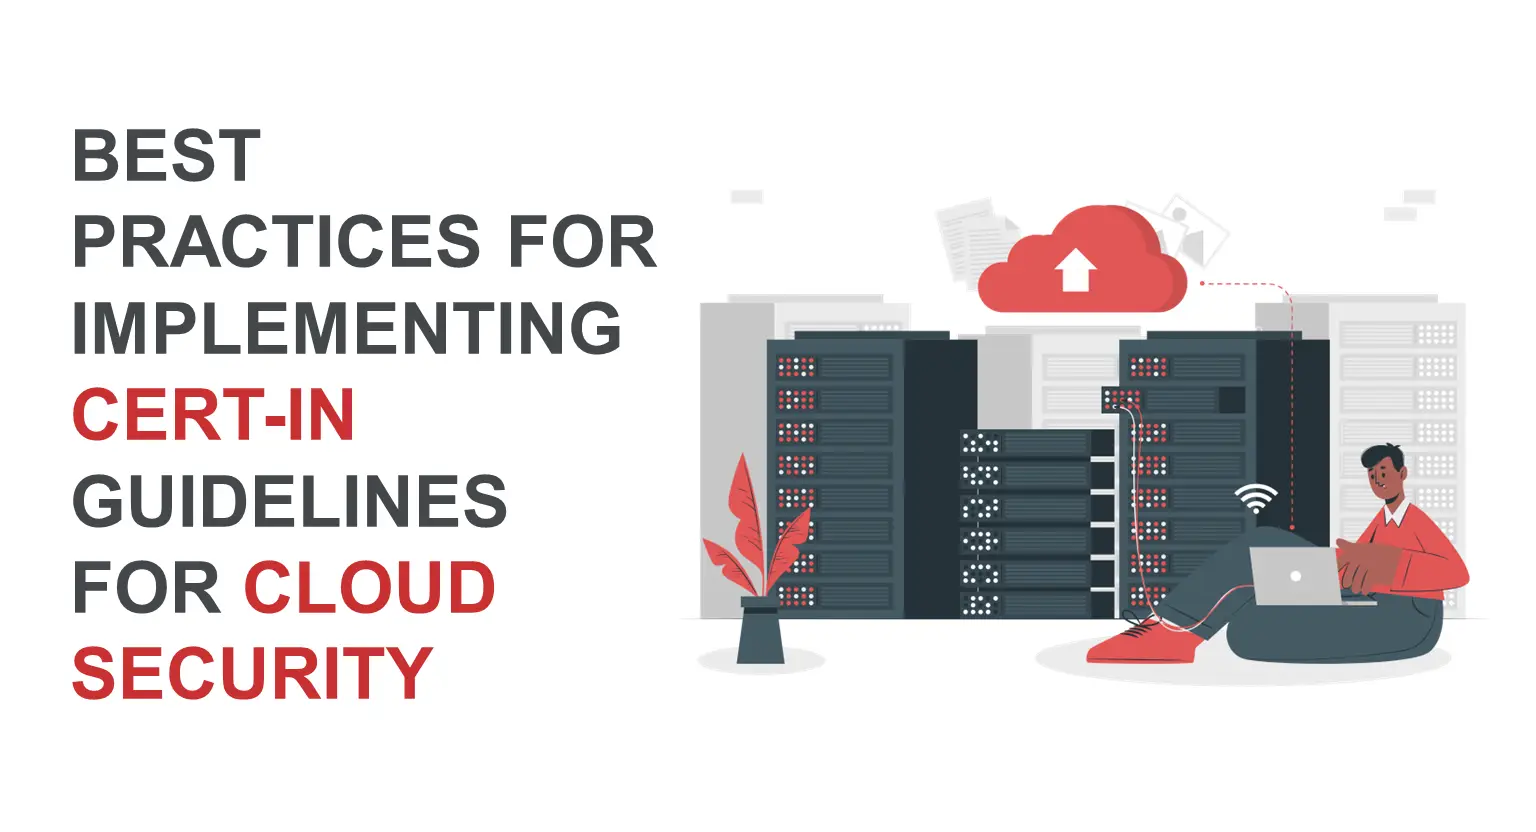 Best practices for implementing CERT-In guidelines for cloud security 